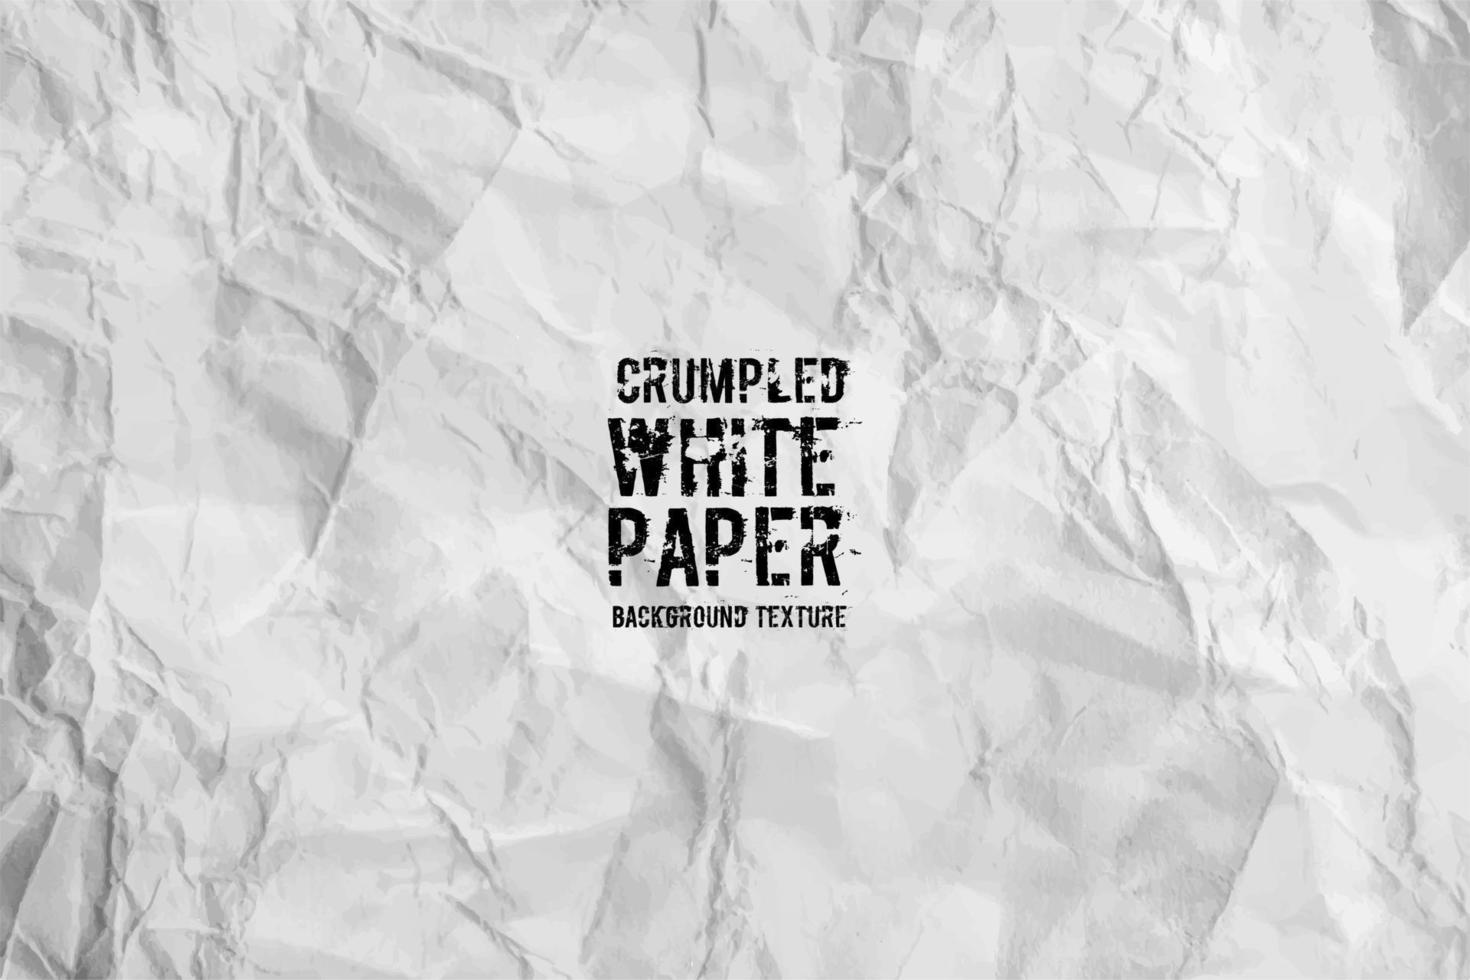 Crumpled white paper. Realistic background texture. Vector EPS 10